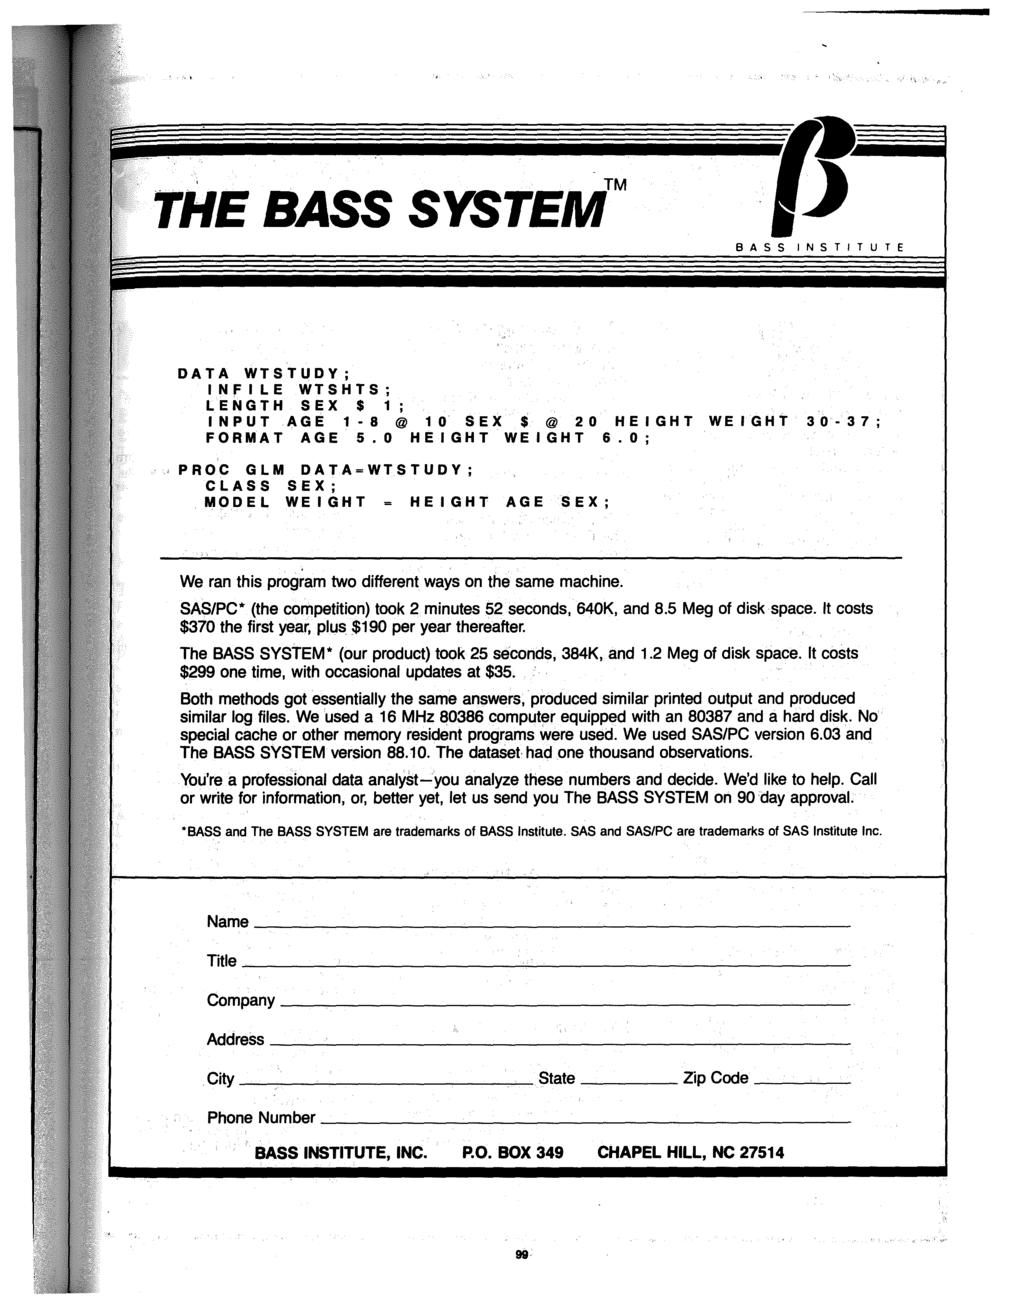 '. TM THE BASS SYSTEM 8 A INSTITUTE DATA WTSTUDY; INFILE WTSHTS; LENGTH SEX $ 1; INPUT AGE 1-8@ 10 SEX$@ 20 HEIGHT WEIGHT 30-37; FORMAT AGE 5.0 HEIGHT WEIGHT 6.